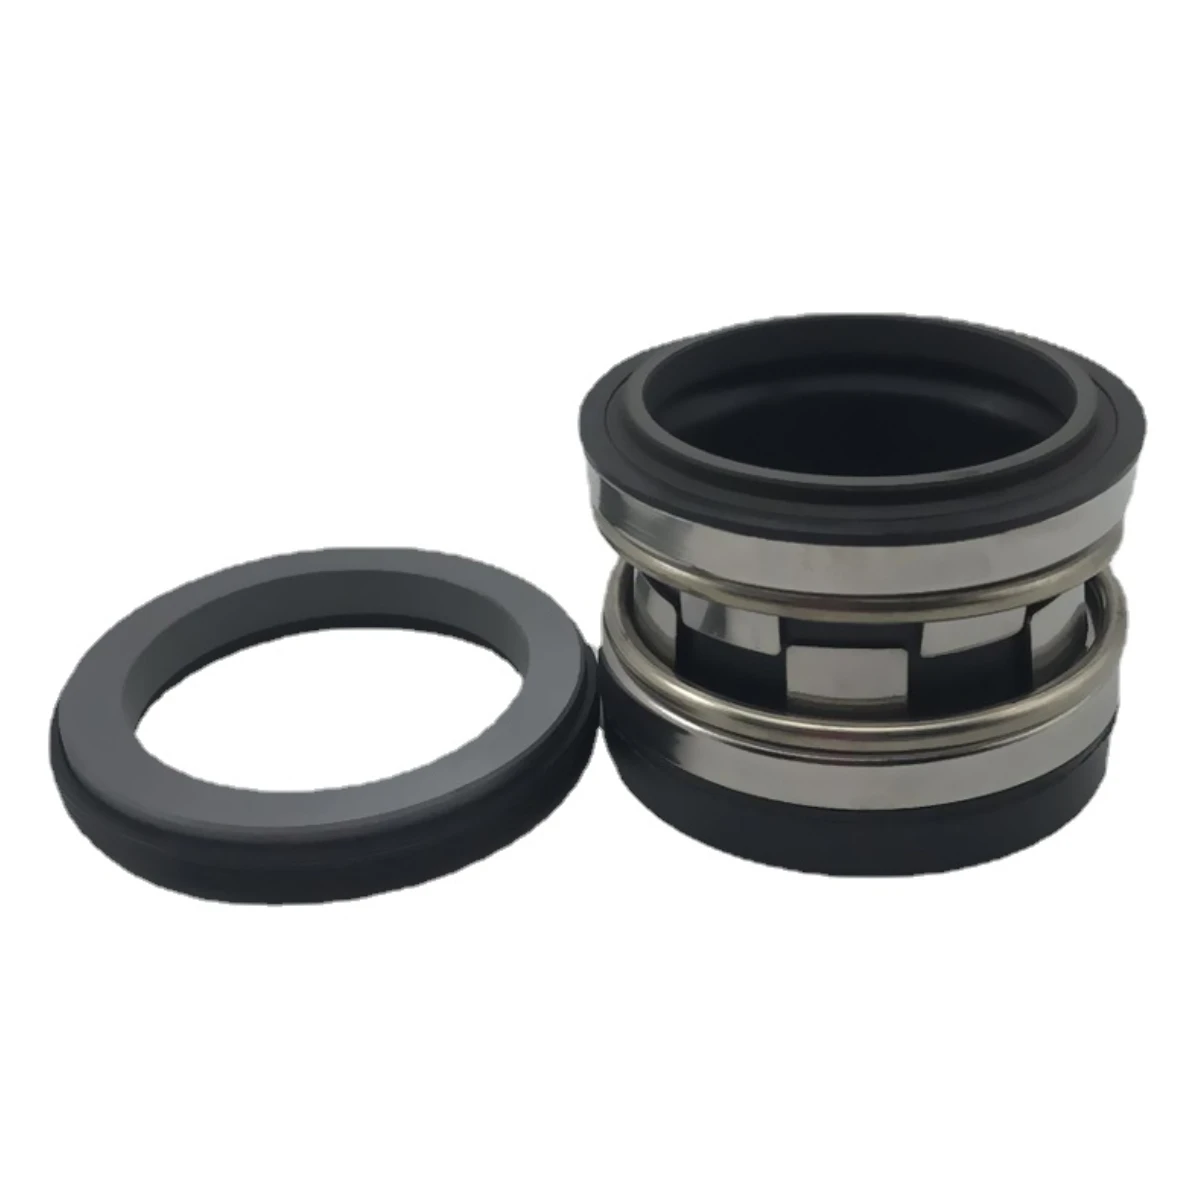 210 Series All Sizes 10 12 14 16 18 20 22 24-100mm Mechanical Shaft Seal With Single Coil Spring For Water Pump Parts